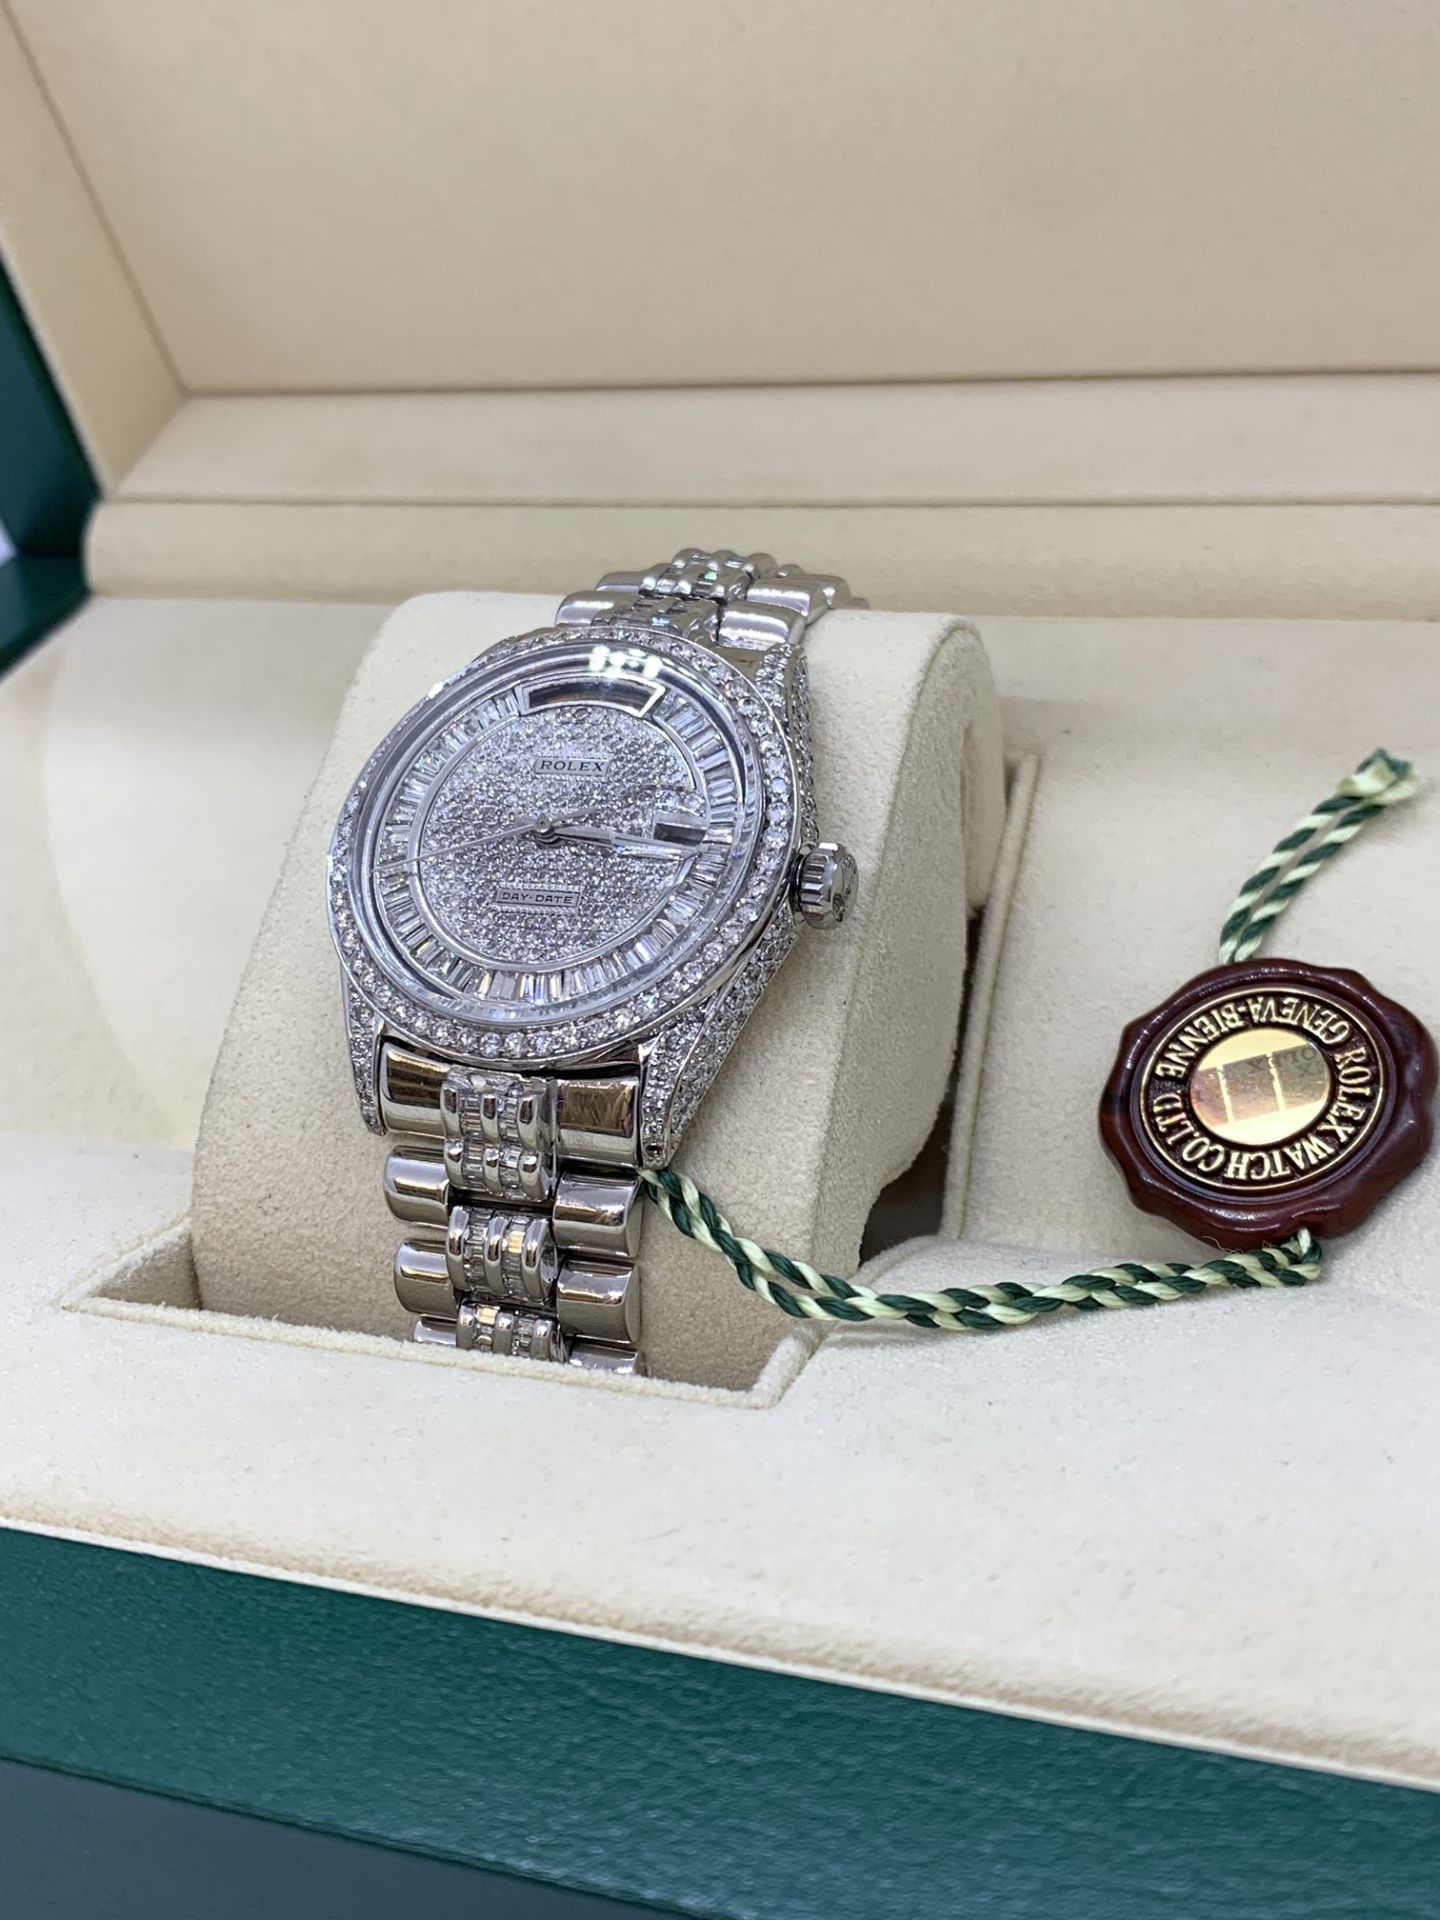 36mm DIAMOND SET DAY-DATE WATCH MARKED ROLEX SET IN WHITE METAL (TESTED AS GOLD) - Image 12 of 15